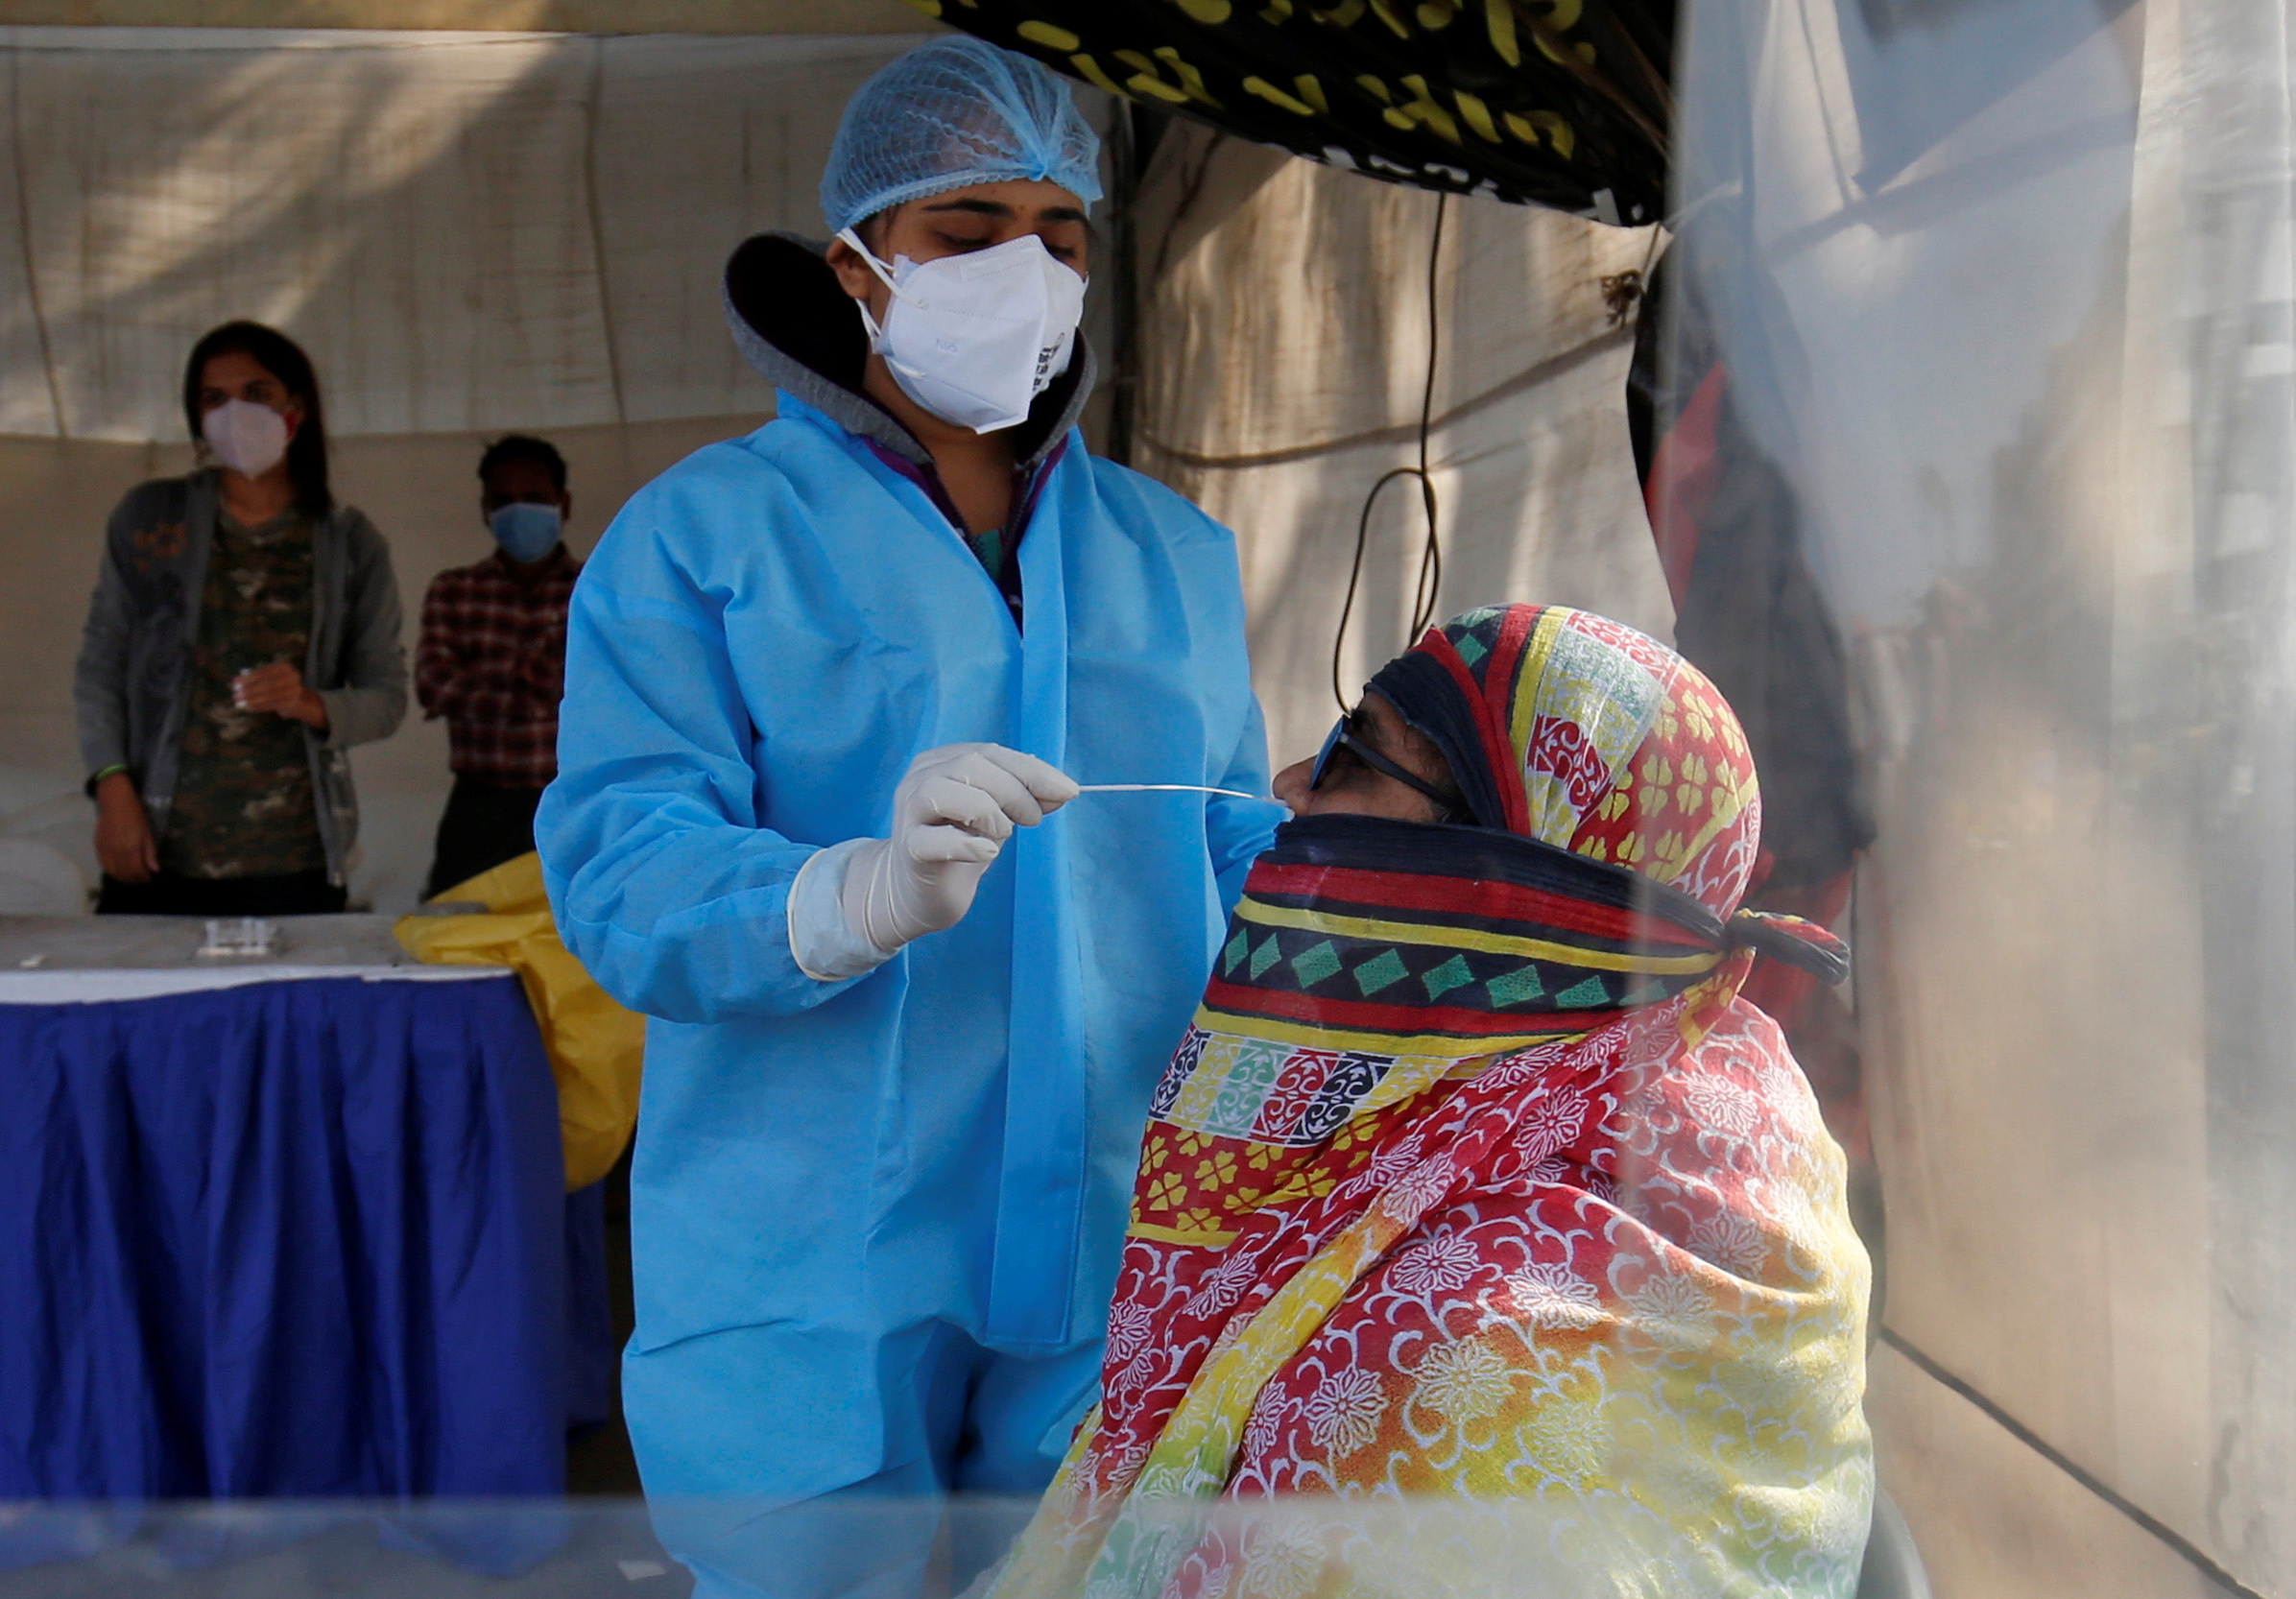 A healthcare worker collects a swab sample from a woman during a rapid antigen testing campaign for the coronavirus disease (COVID-19), in Ahmedabad